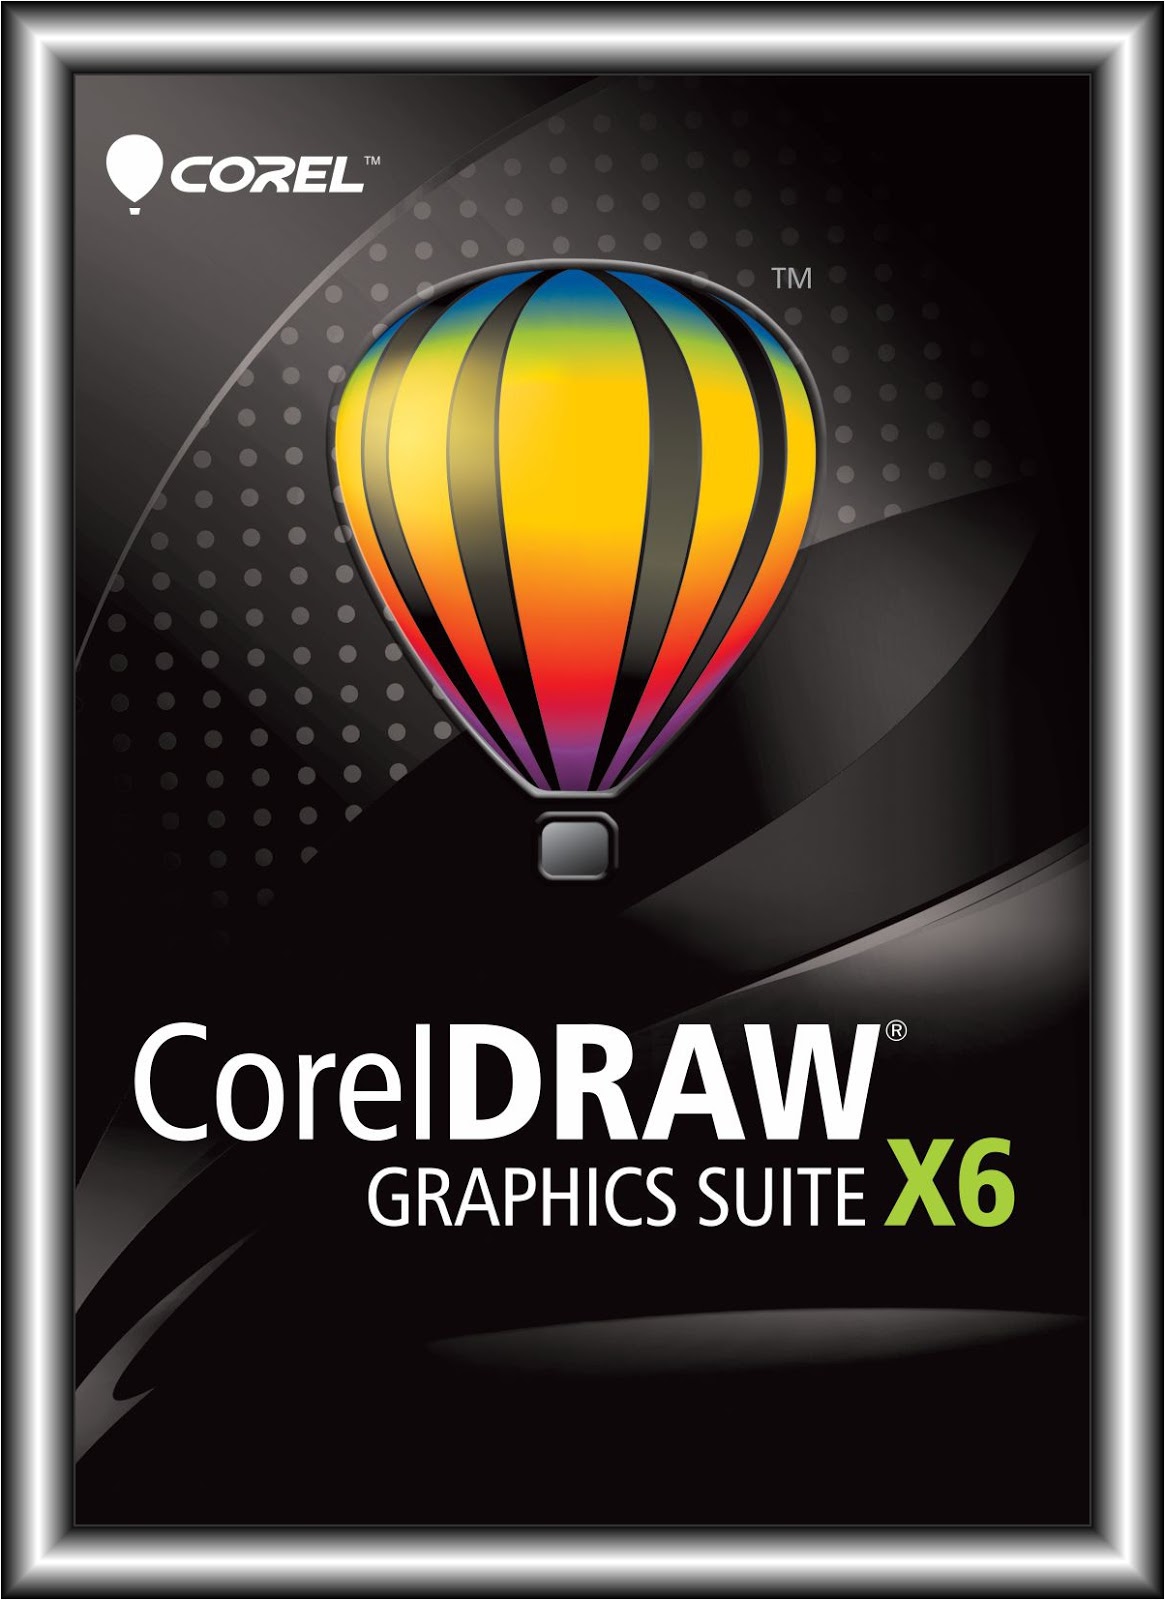 download coreldraw x6 with serial number